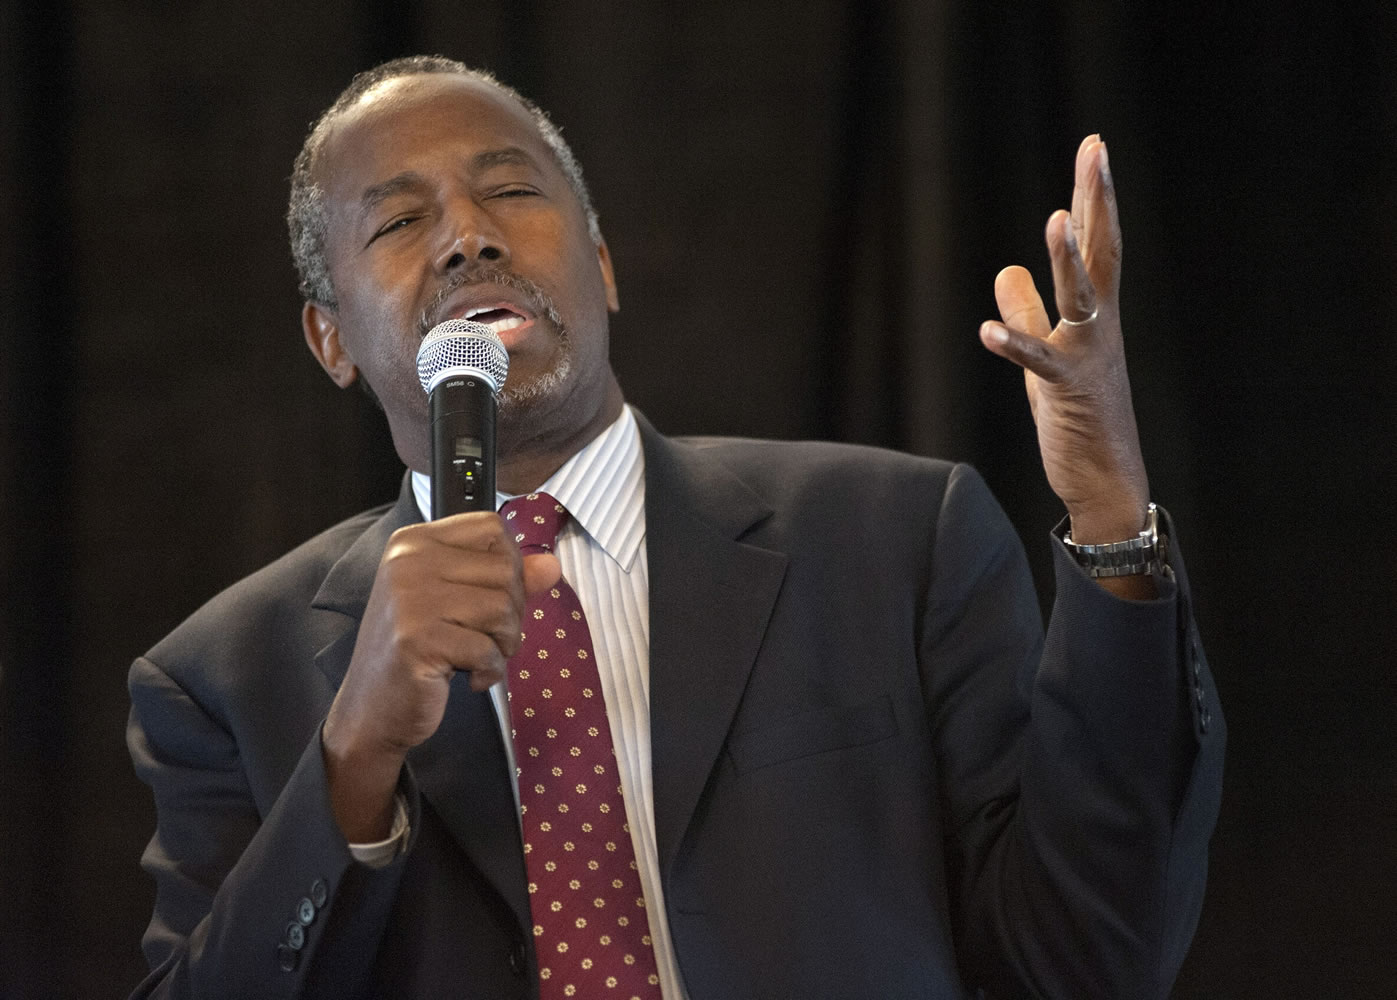 Republican presidential candidate Ben Carson speaks at the Eagle Council XLIV, sponsored by the Eagle Forum, at the Marriott St. Louis Airport in St. Louis on Friday.